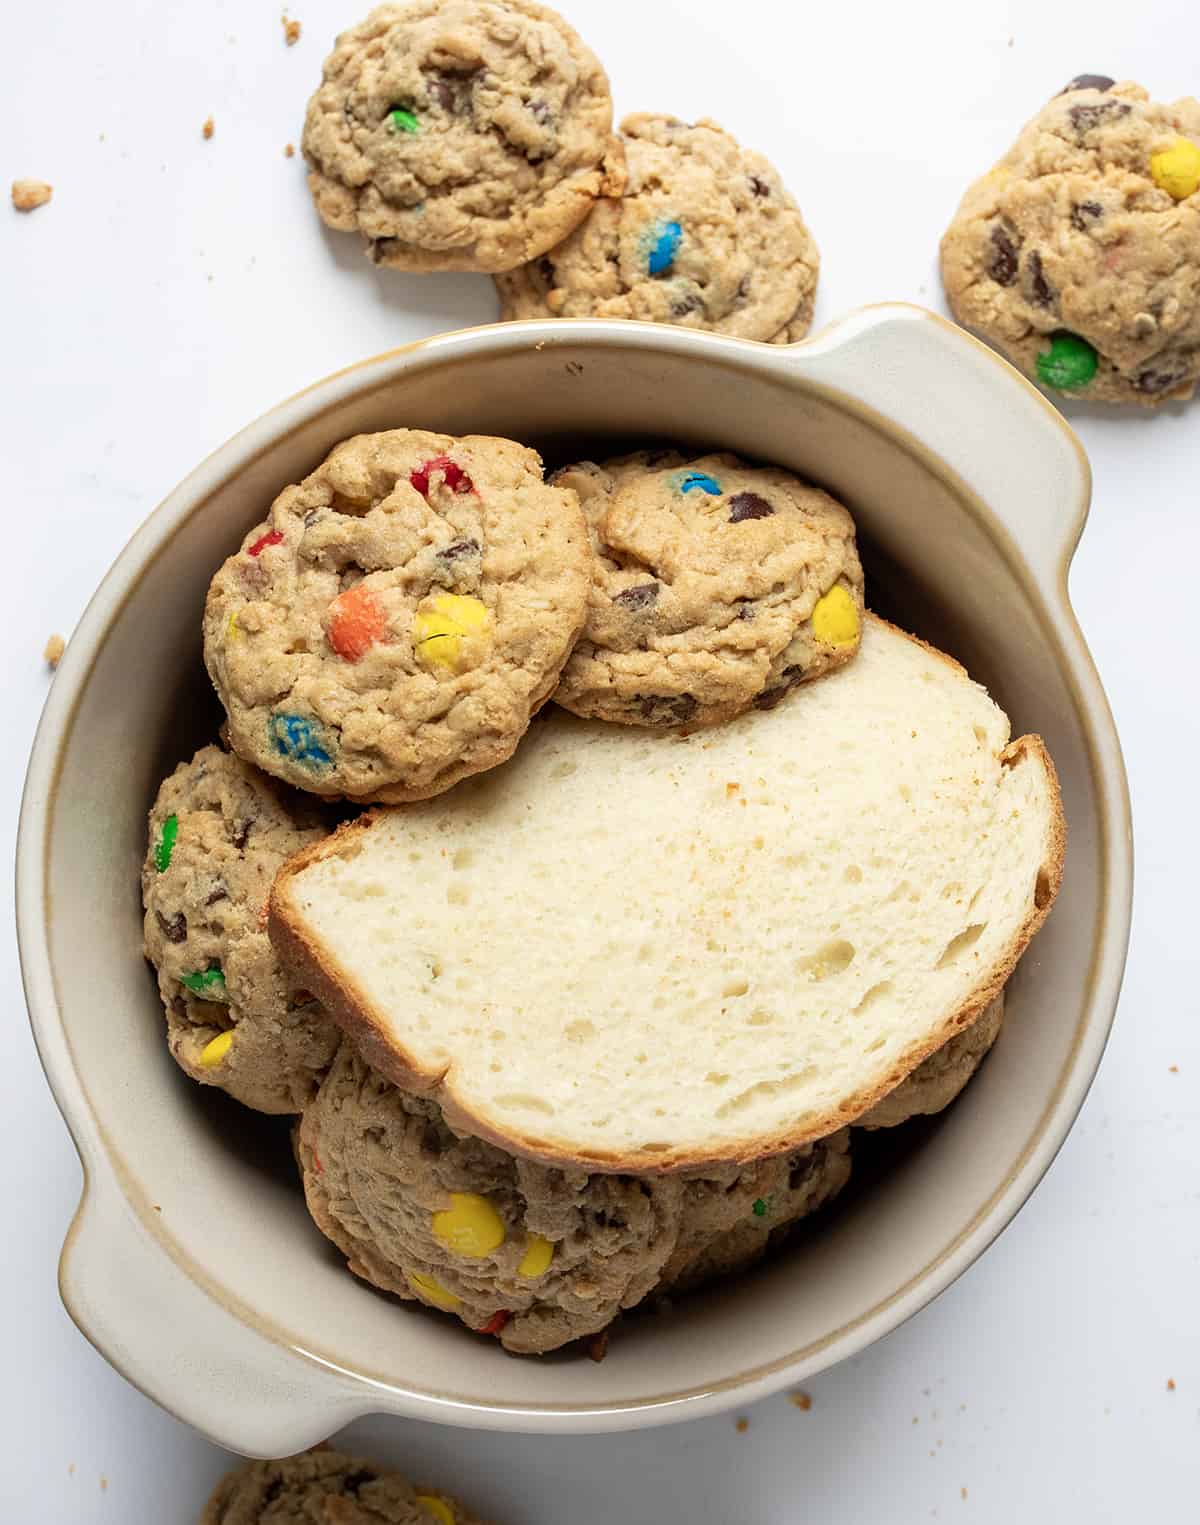 Bowl of Cookies with a Slice of Bread